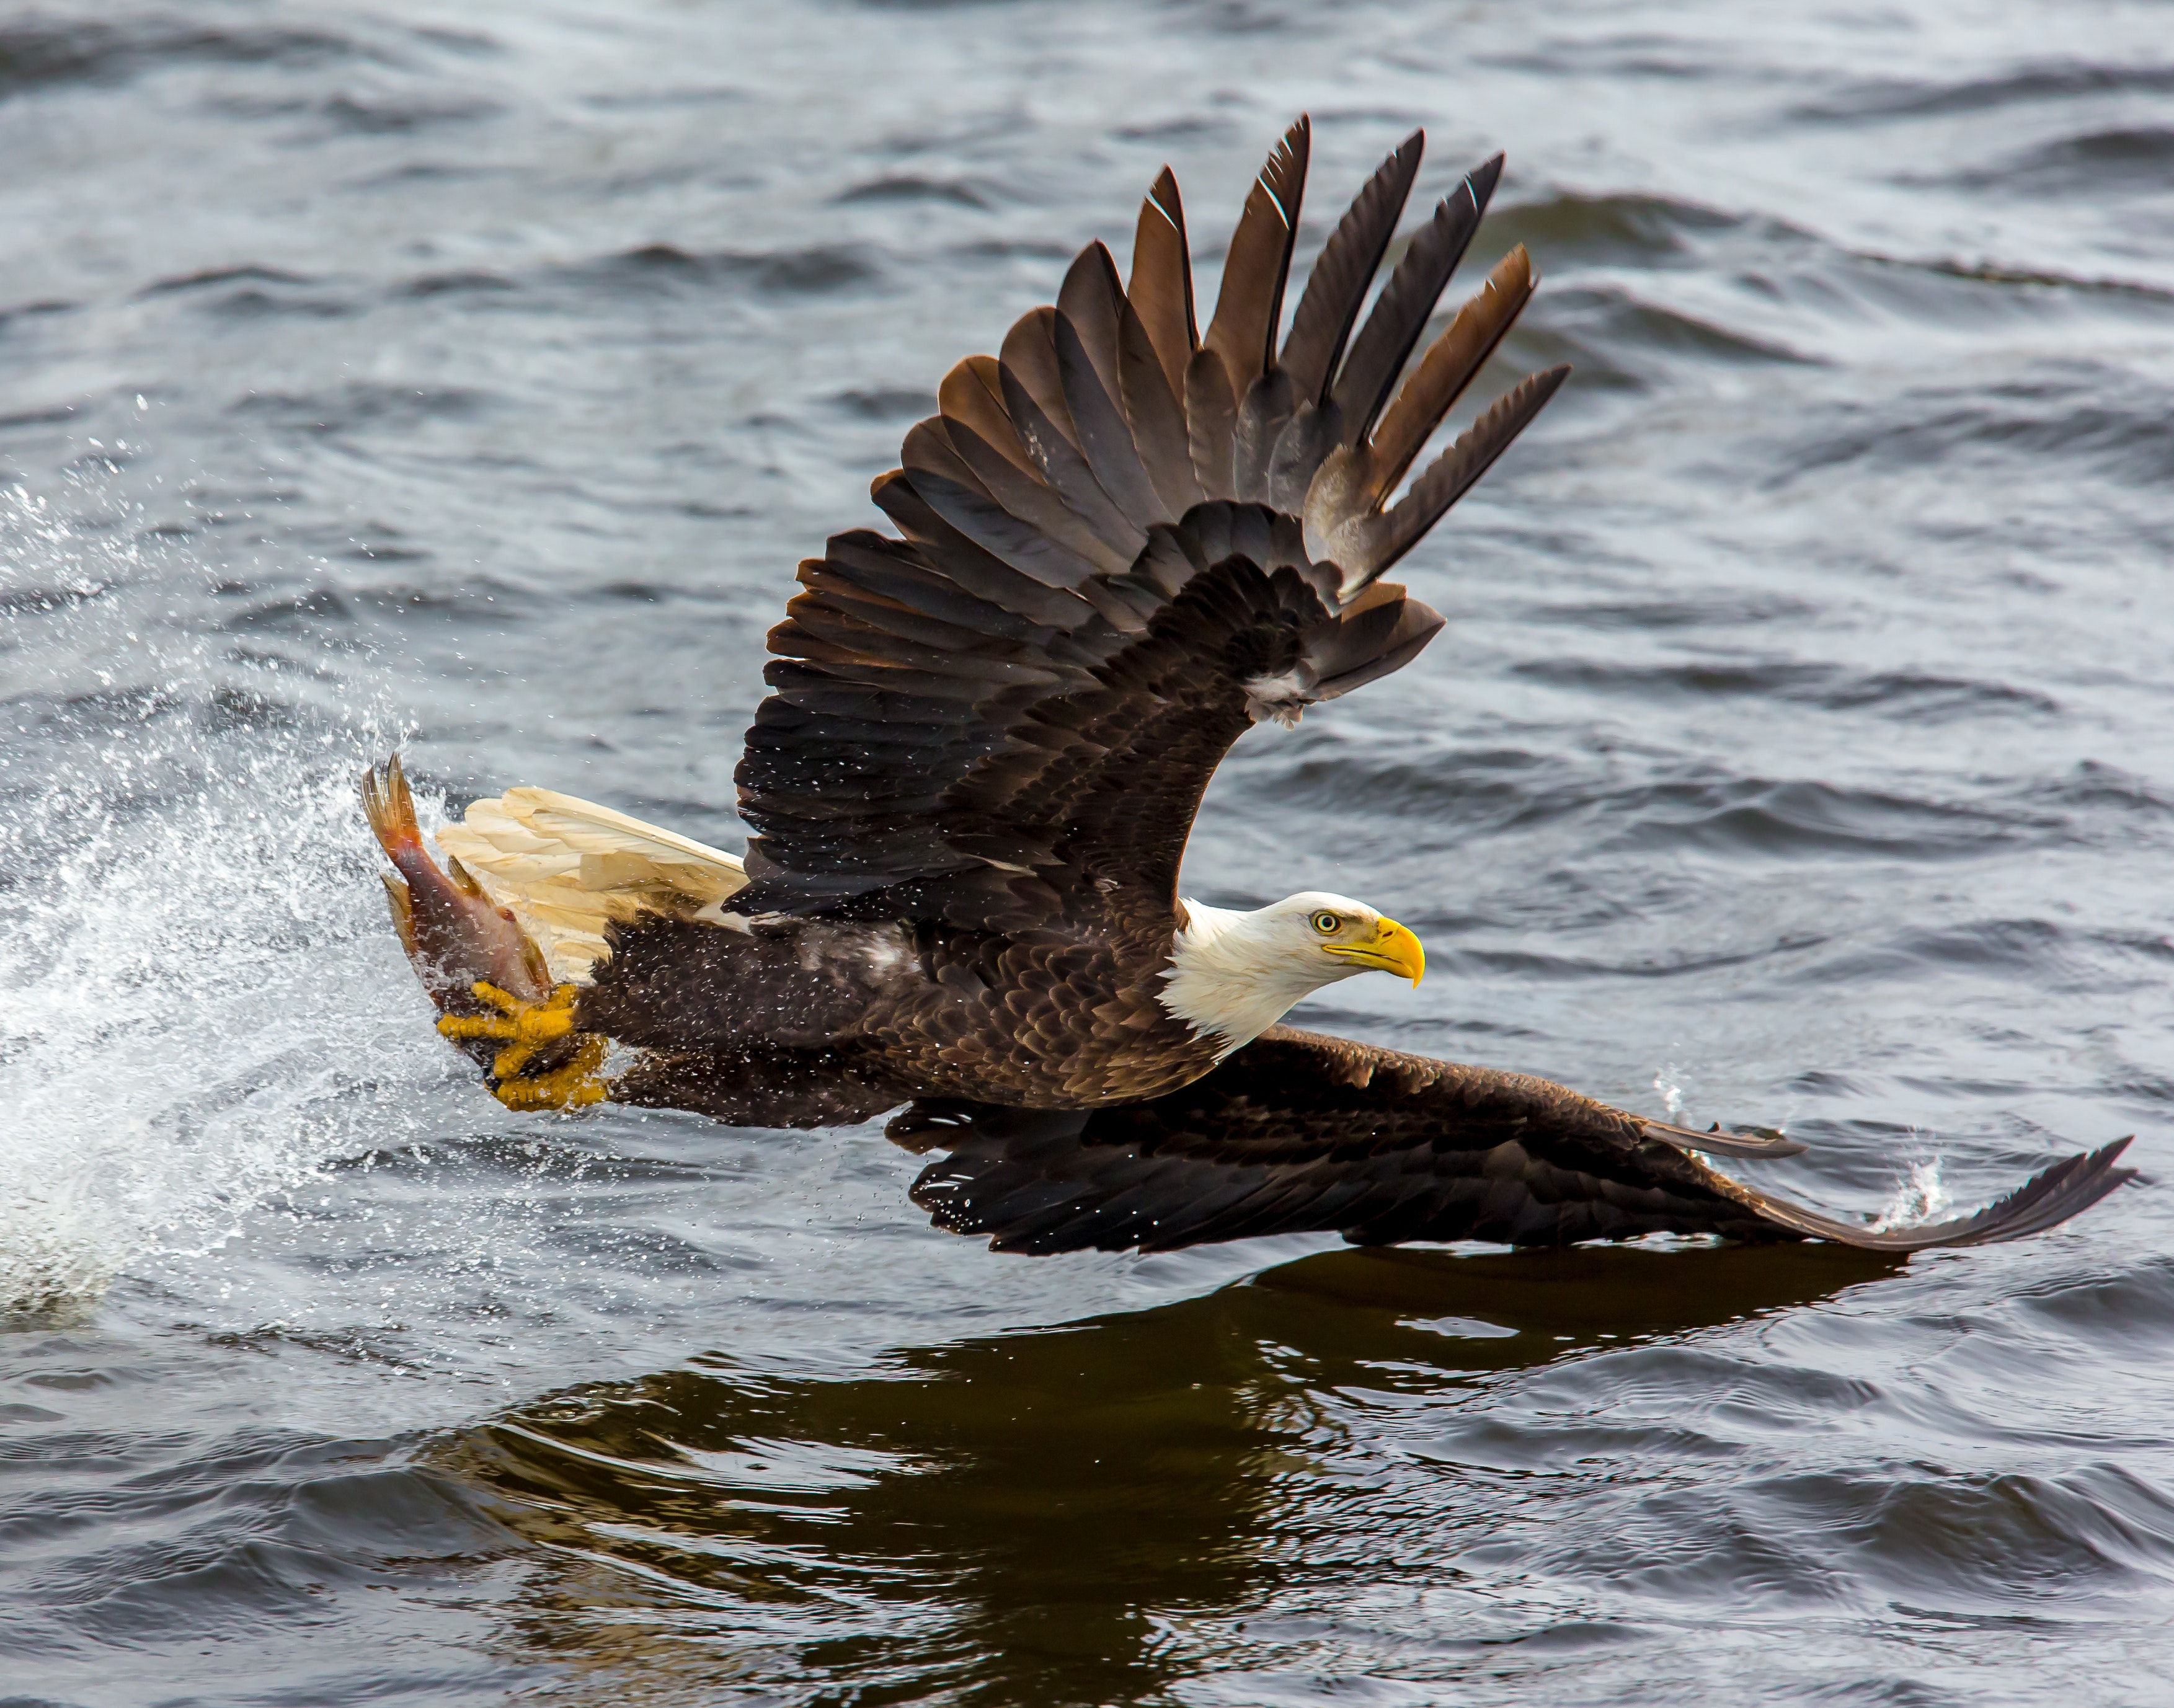 Bald Eagle over the Body of Water, Action, Nature, Wildlife, Wild, HQ Photo